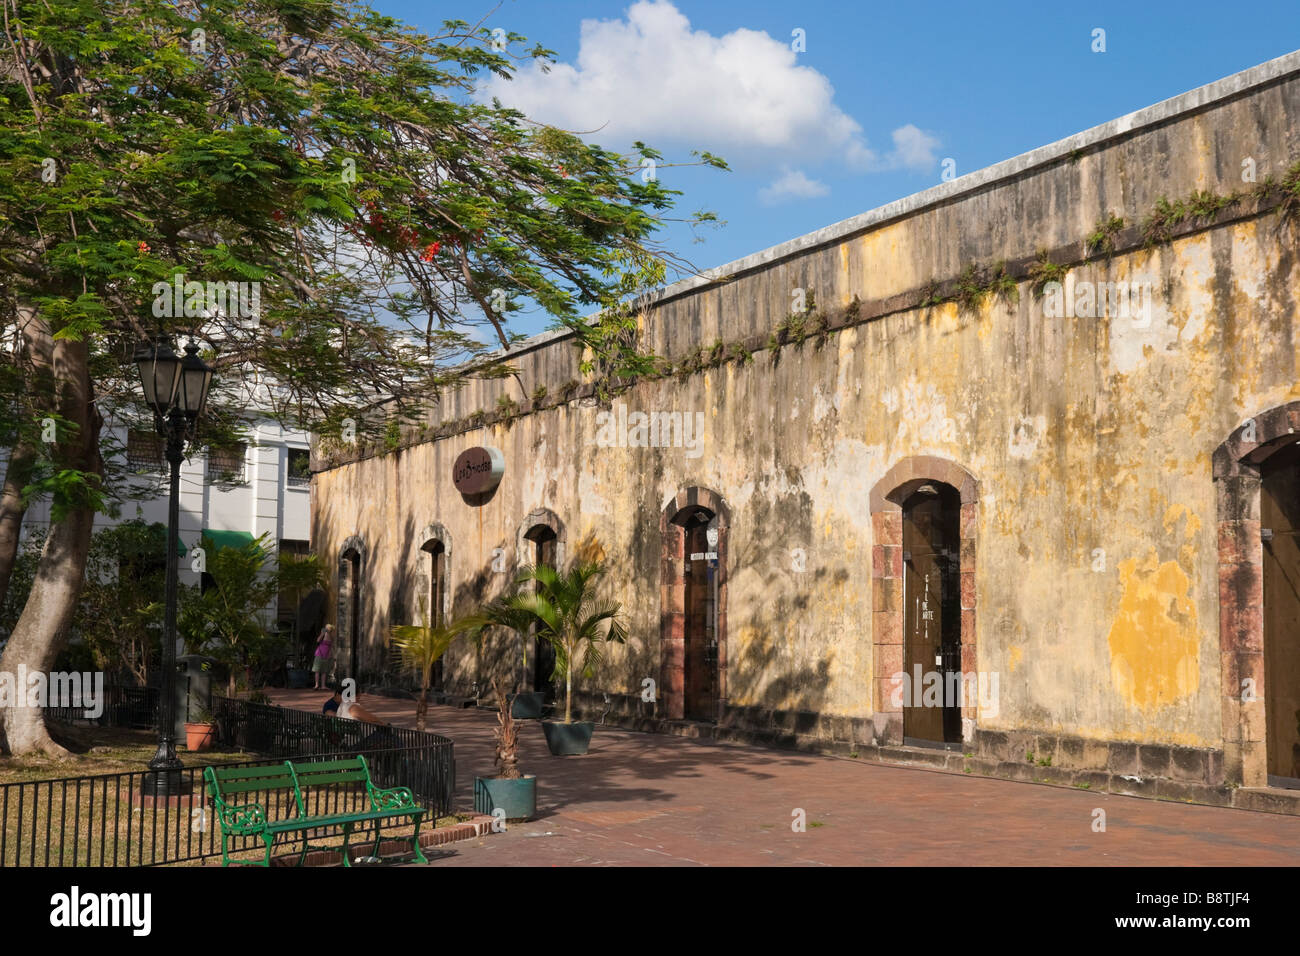 National Culture Institute. French Plaza, Old Quarter, Panama City, Republic of Panama, Central America Stock Photo